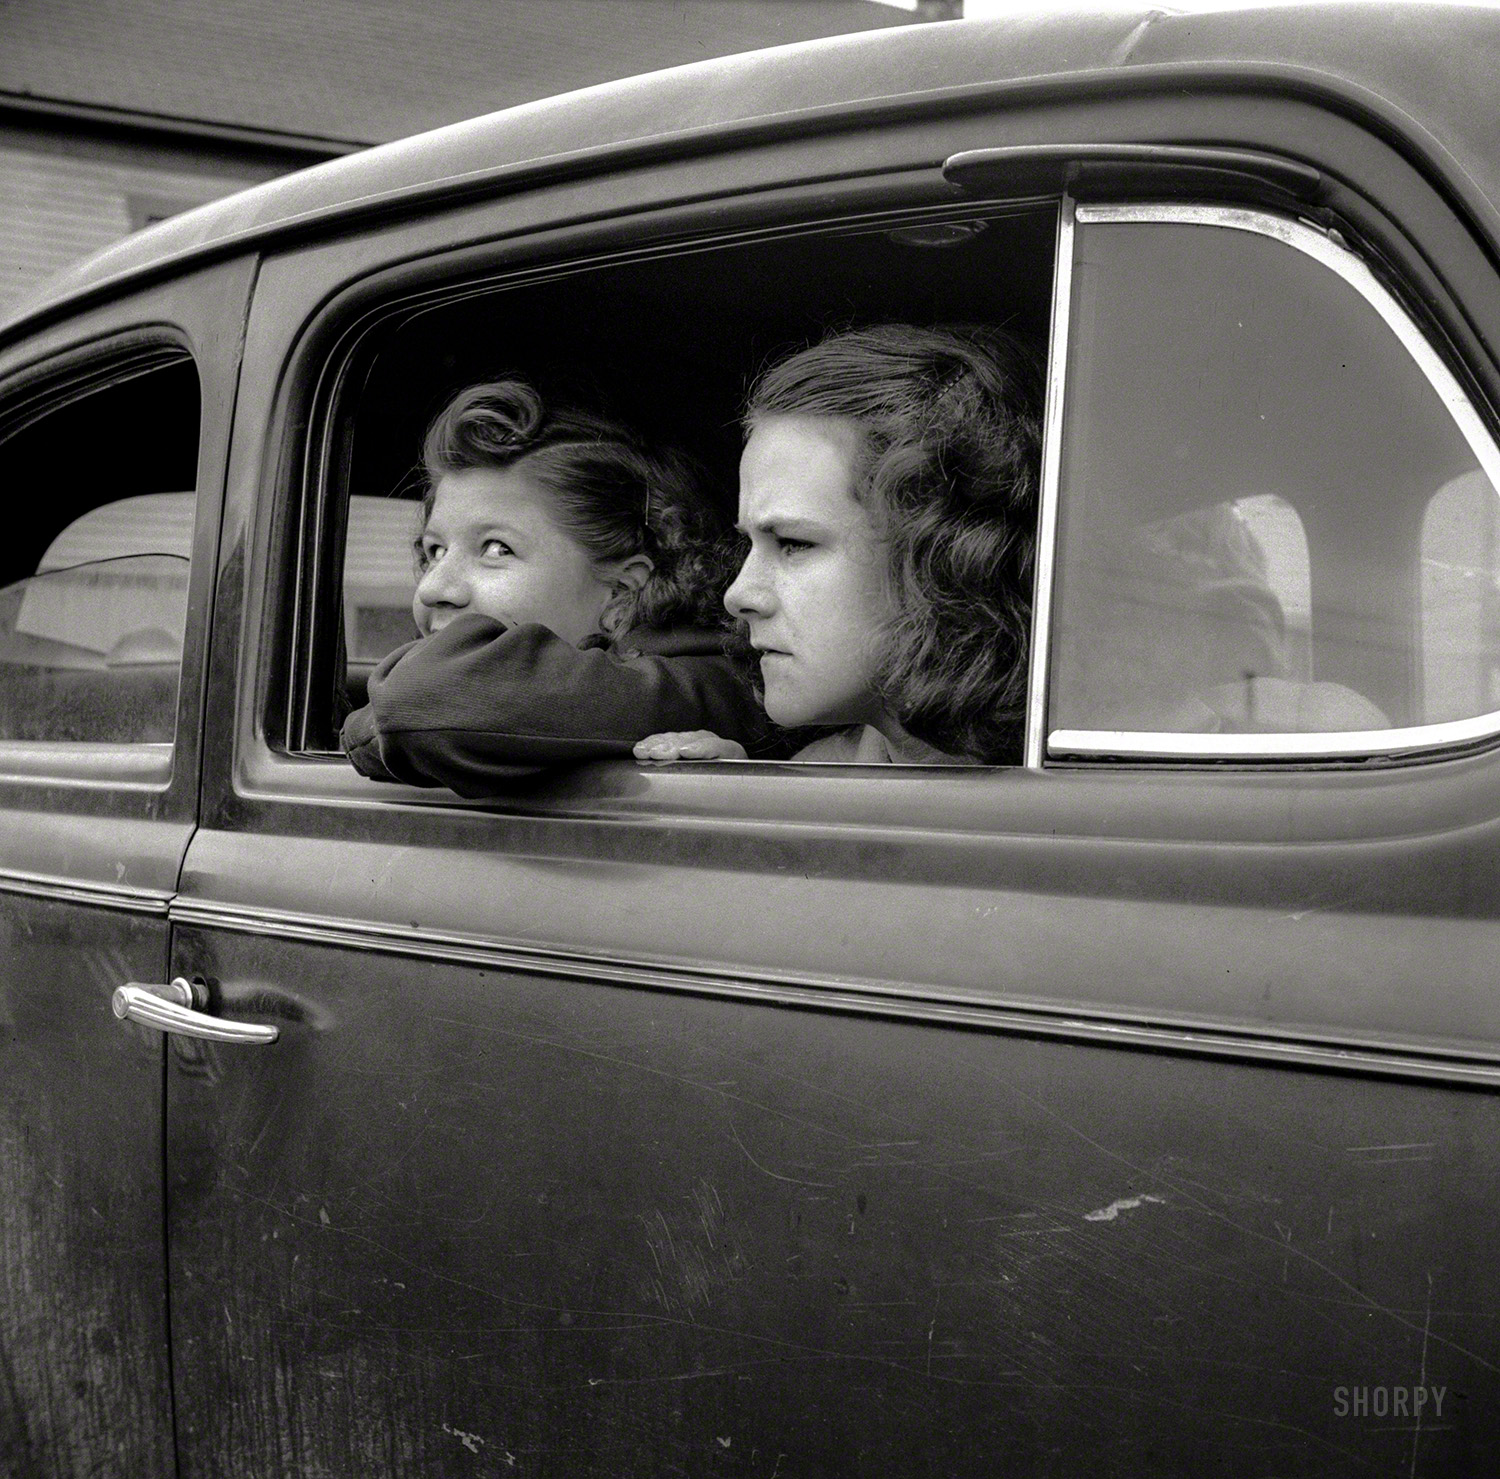 May 1943. Ashland, Aroostook County, Maine. "Girls at Memorial Day parade. Even with gasoline rationed, many people attended the ceremony in cars." Photo by John Collier for the Office of War Information. View full size.